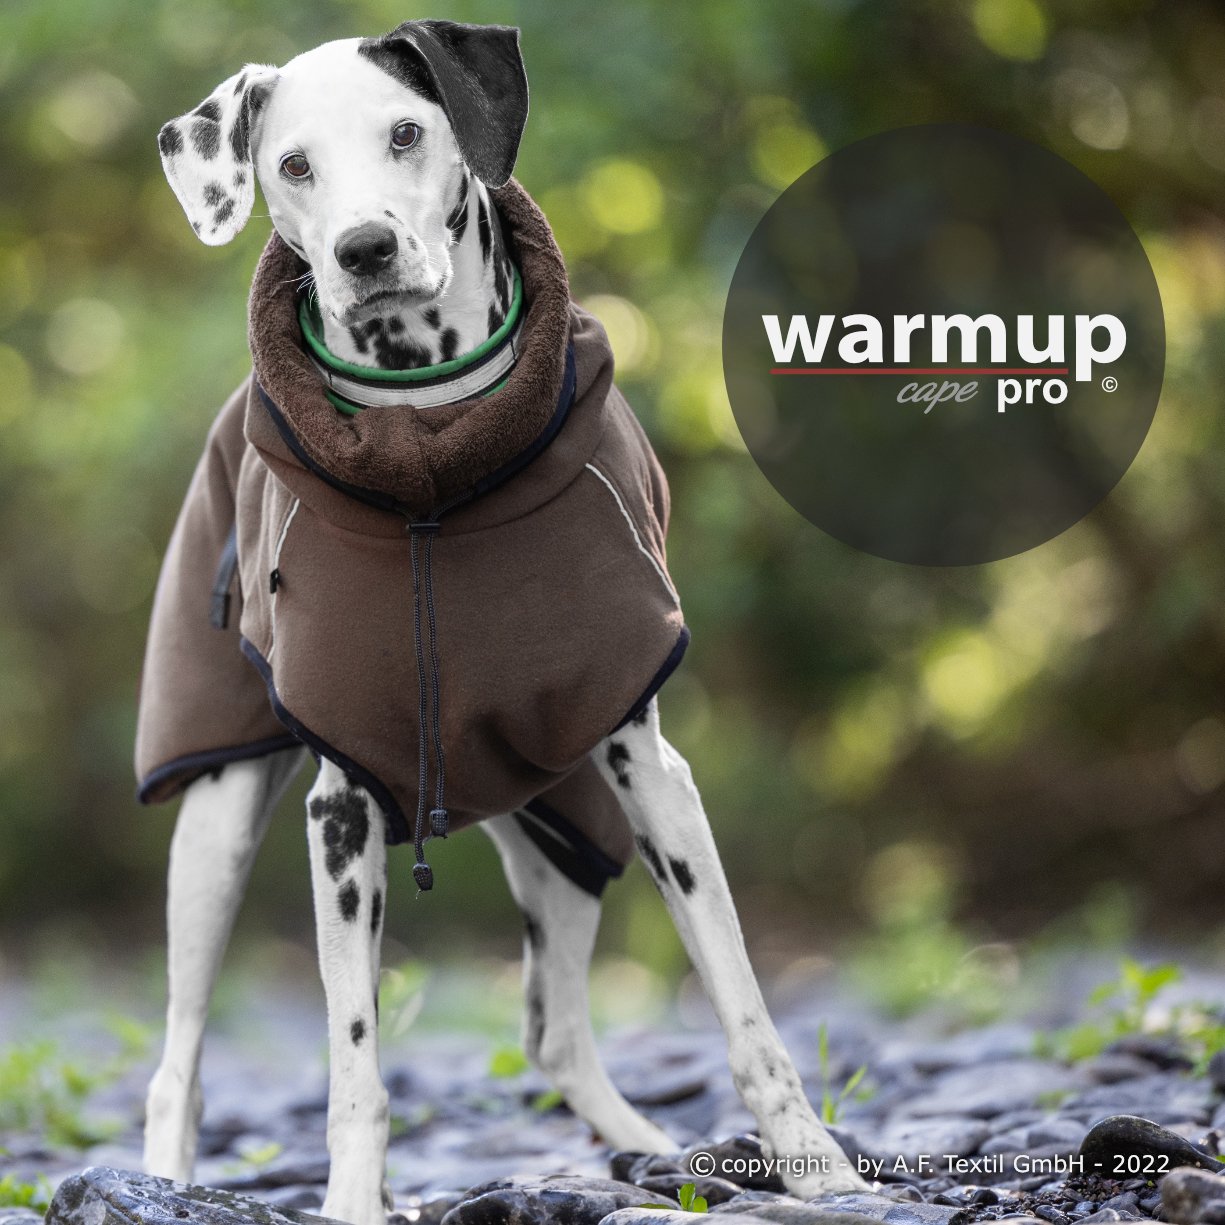 Warmup Cape Pro 2022 - Mocca Fleece / Brown Frottee